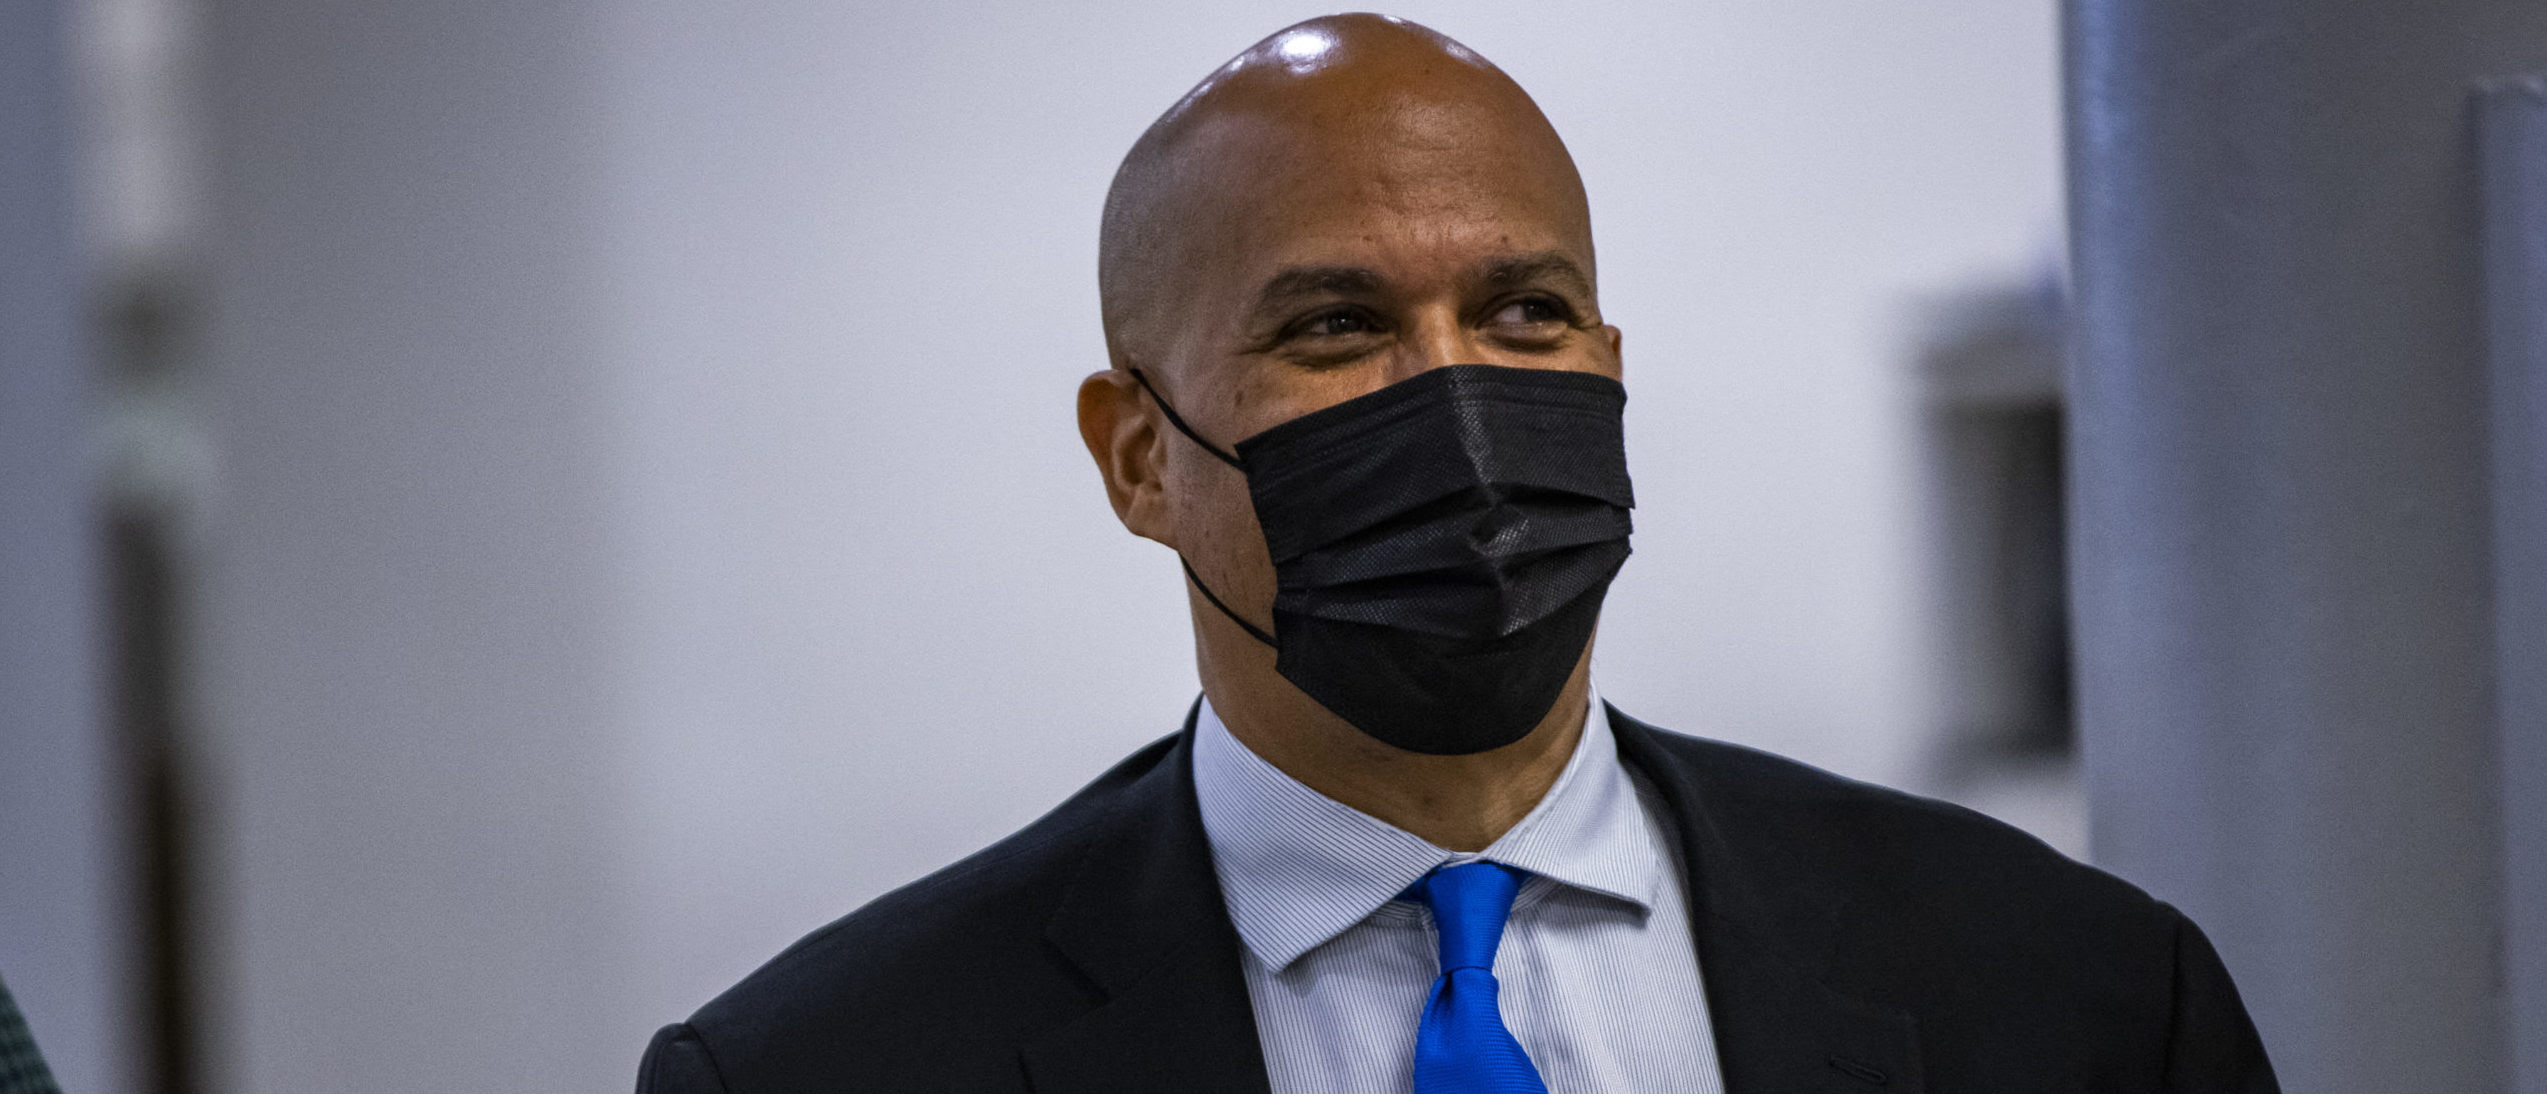 Sen. Booker Tests Positive For COVID-19